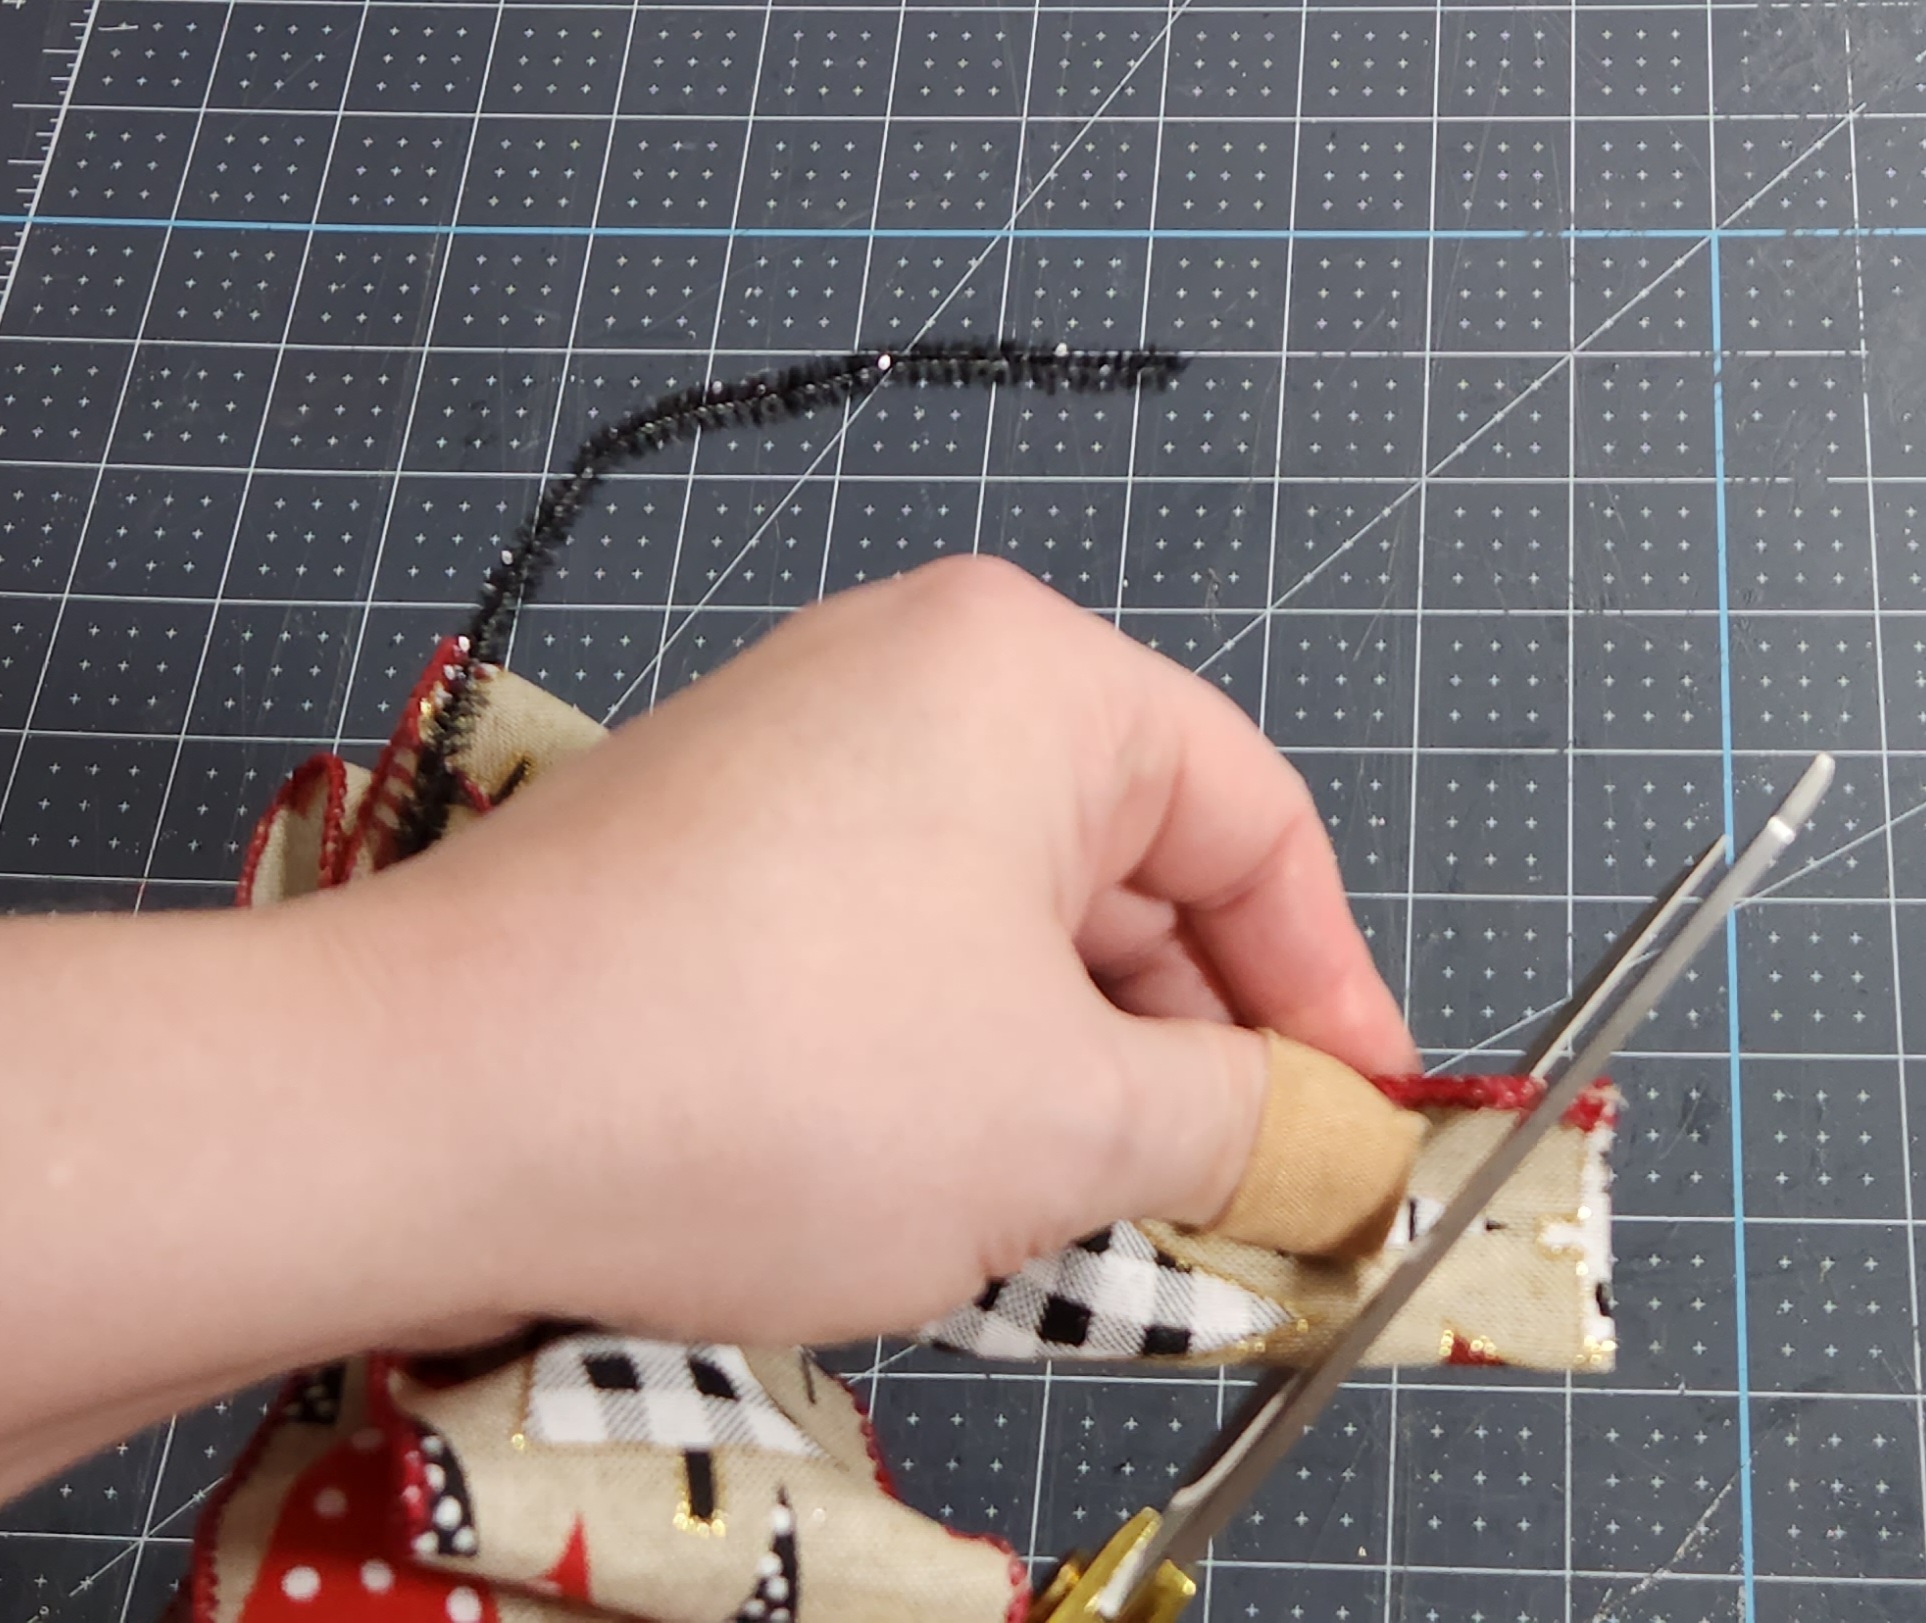 Dovetailing the ends of a six loop bow for the tree topper.